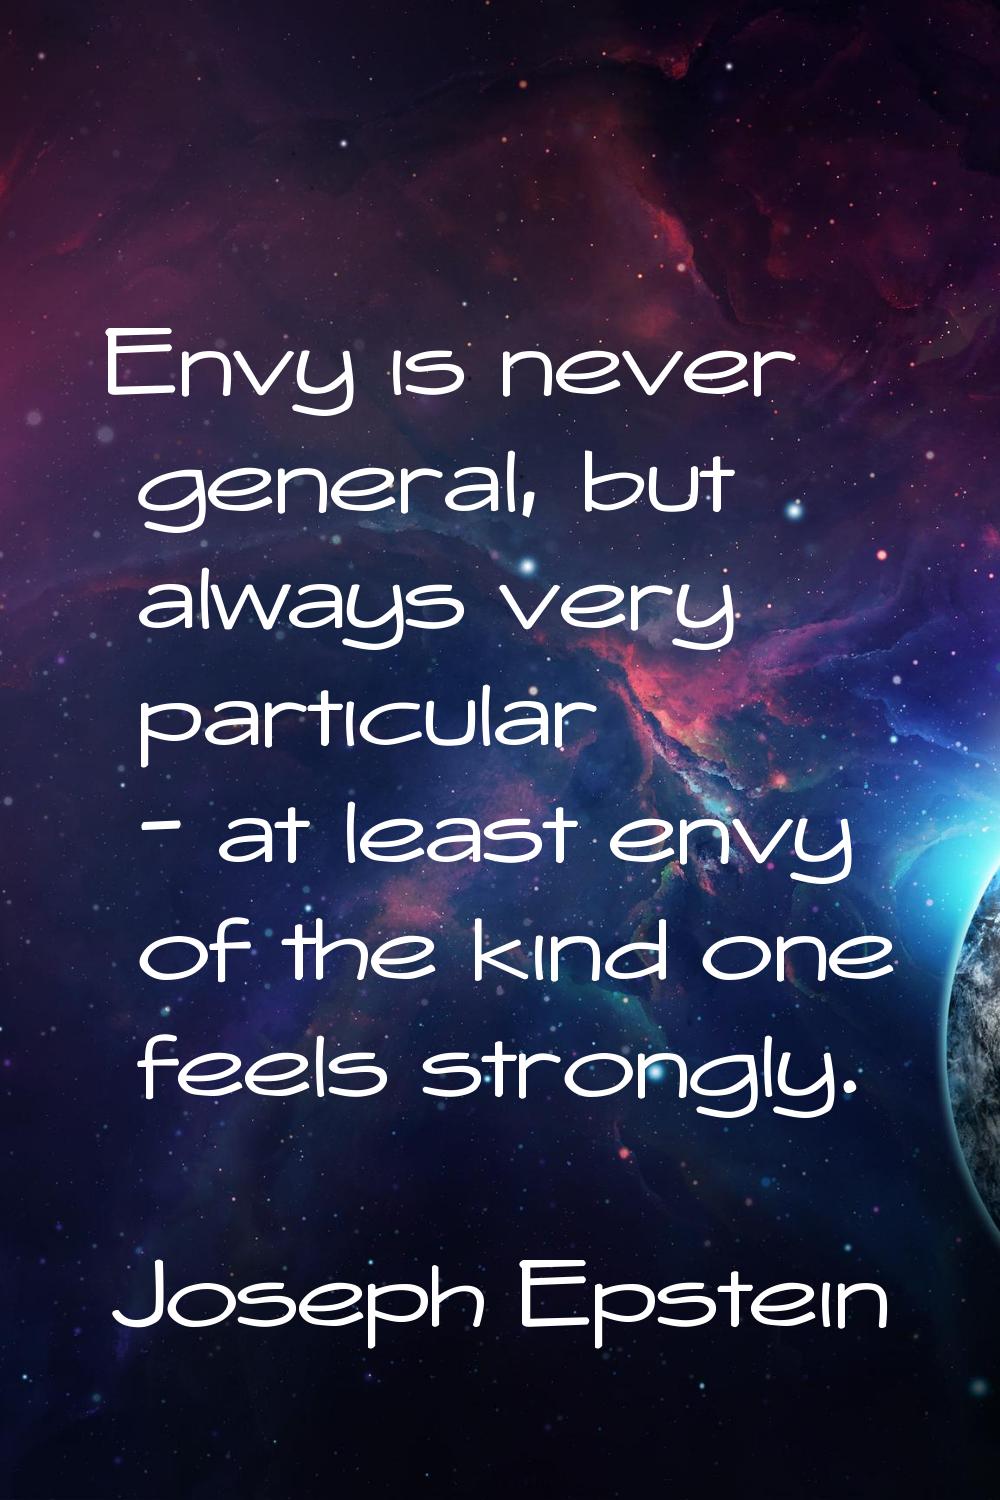 Envy is never general, but always very particular - at least envy of the kind one feels strongly.